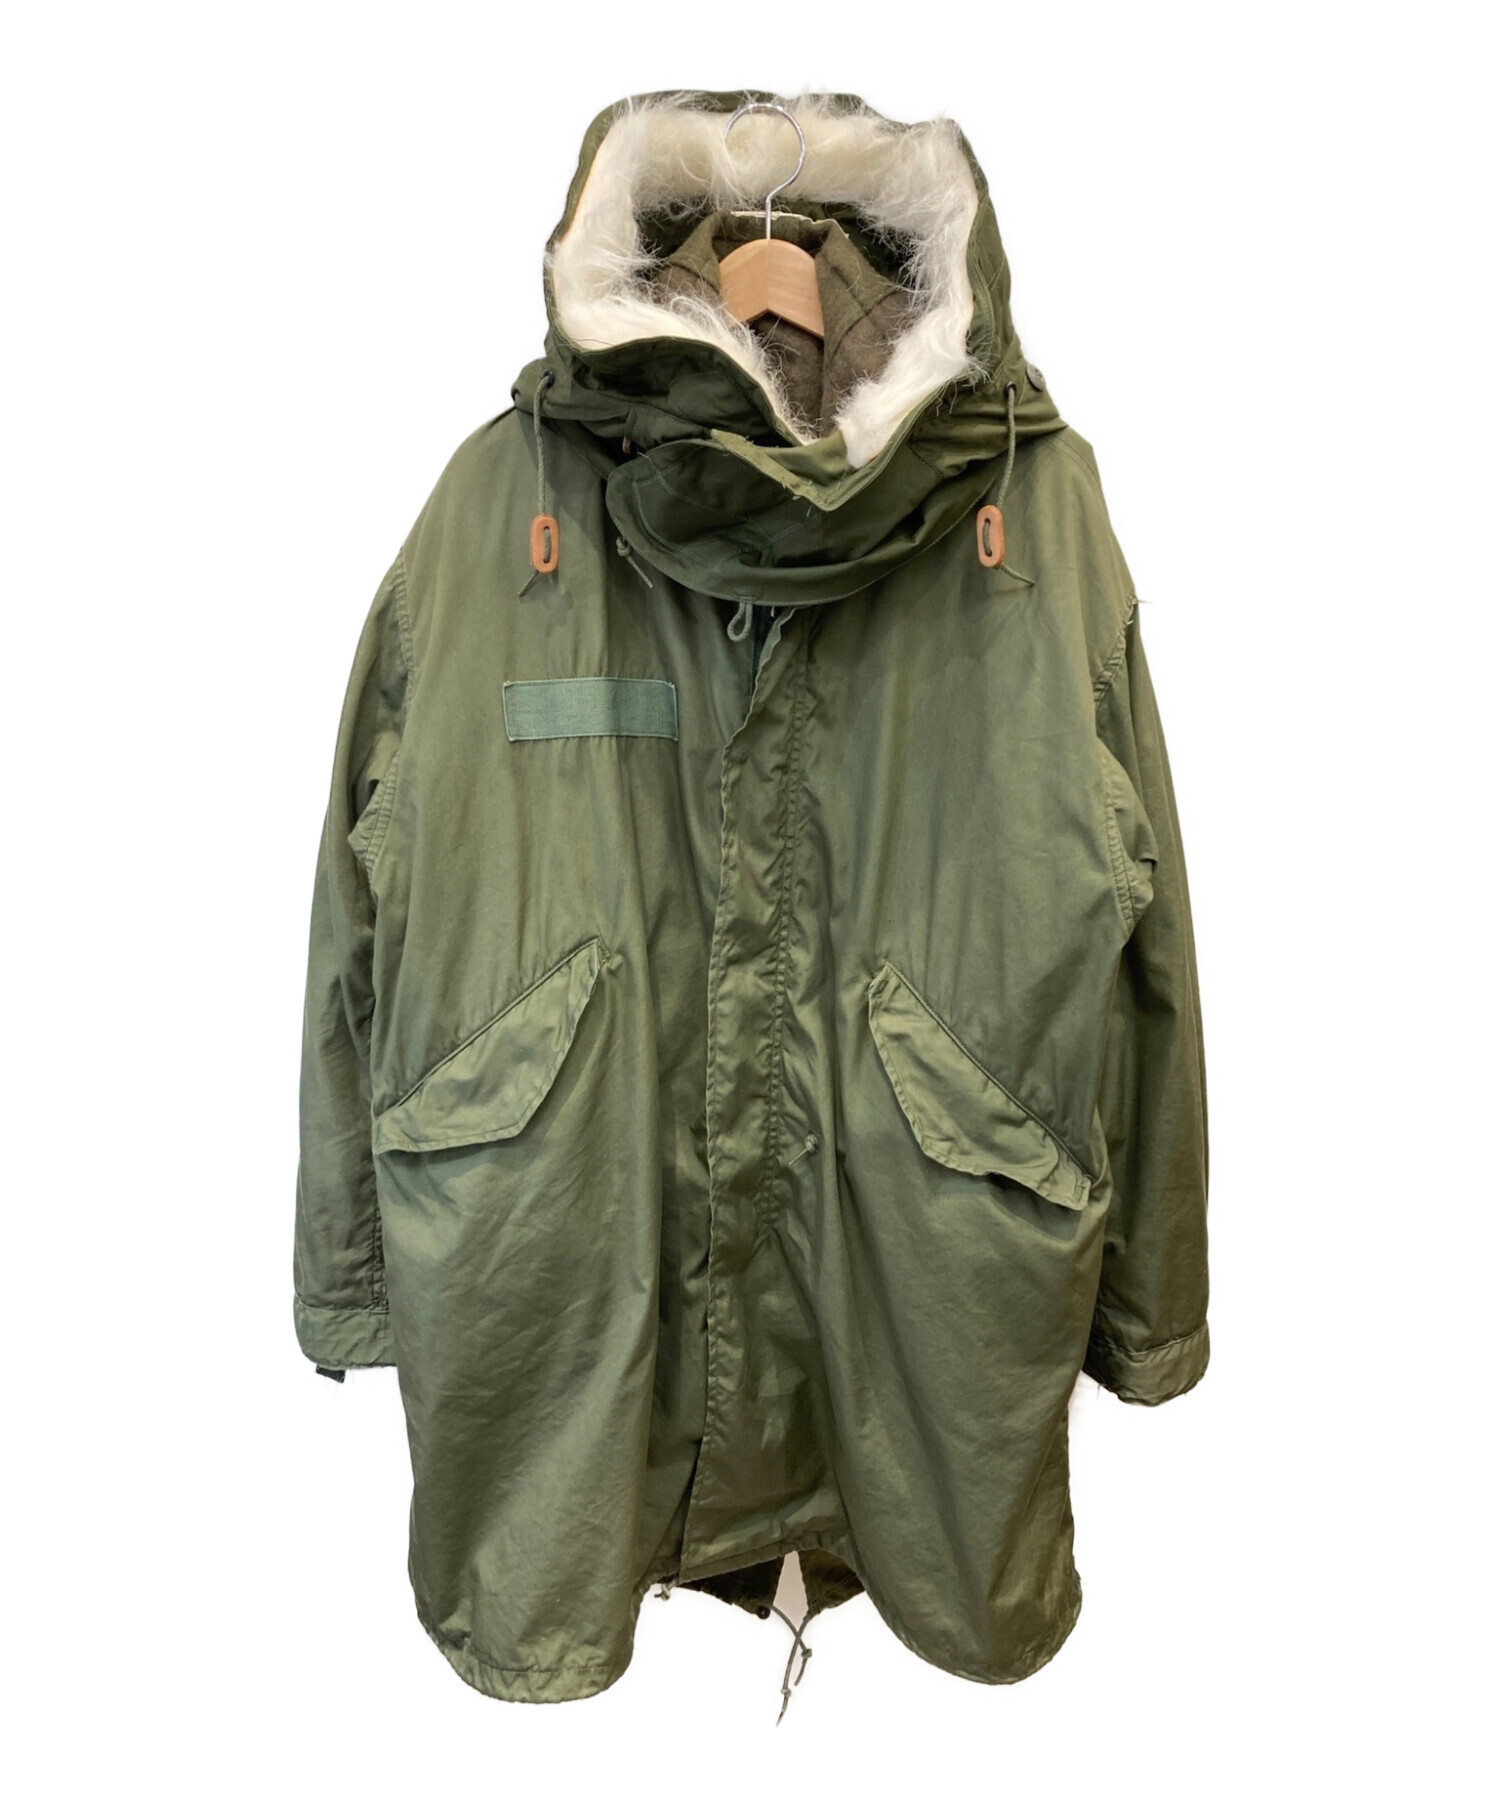 US ARMY (ユーエス アーミー) [古着]M65 Cold Weather Parka オリーブ サイズ:SMALL